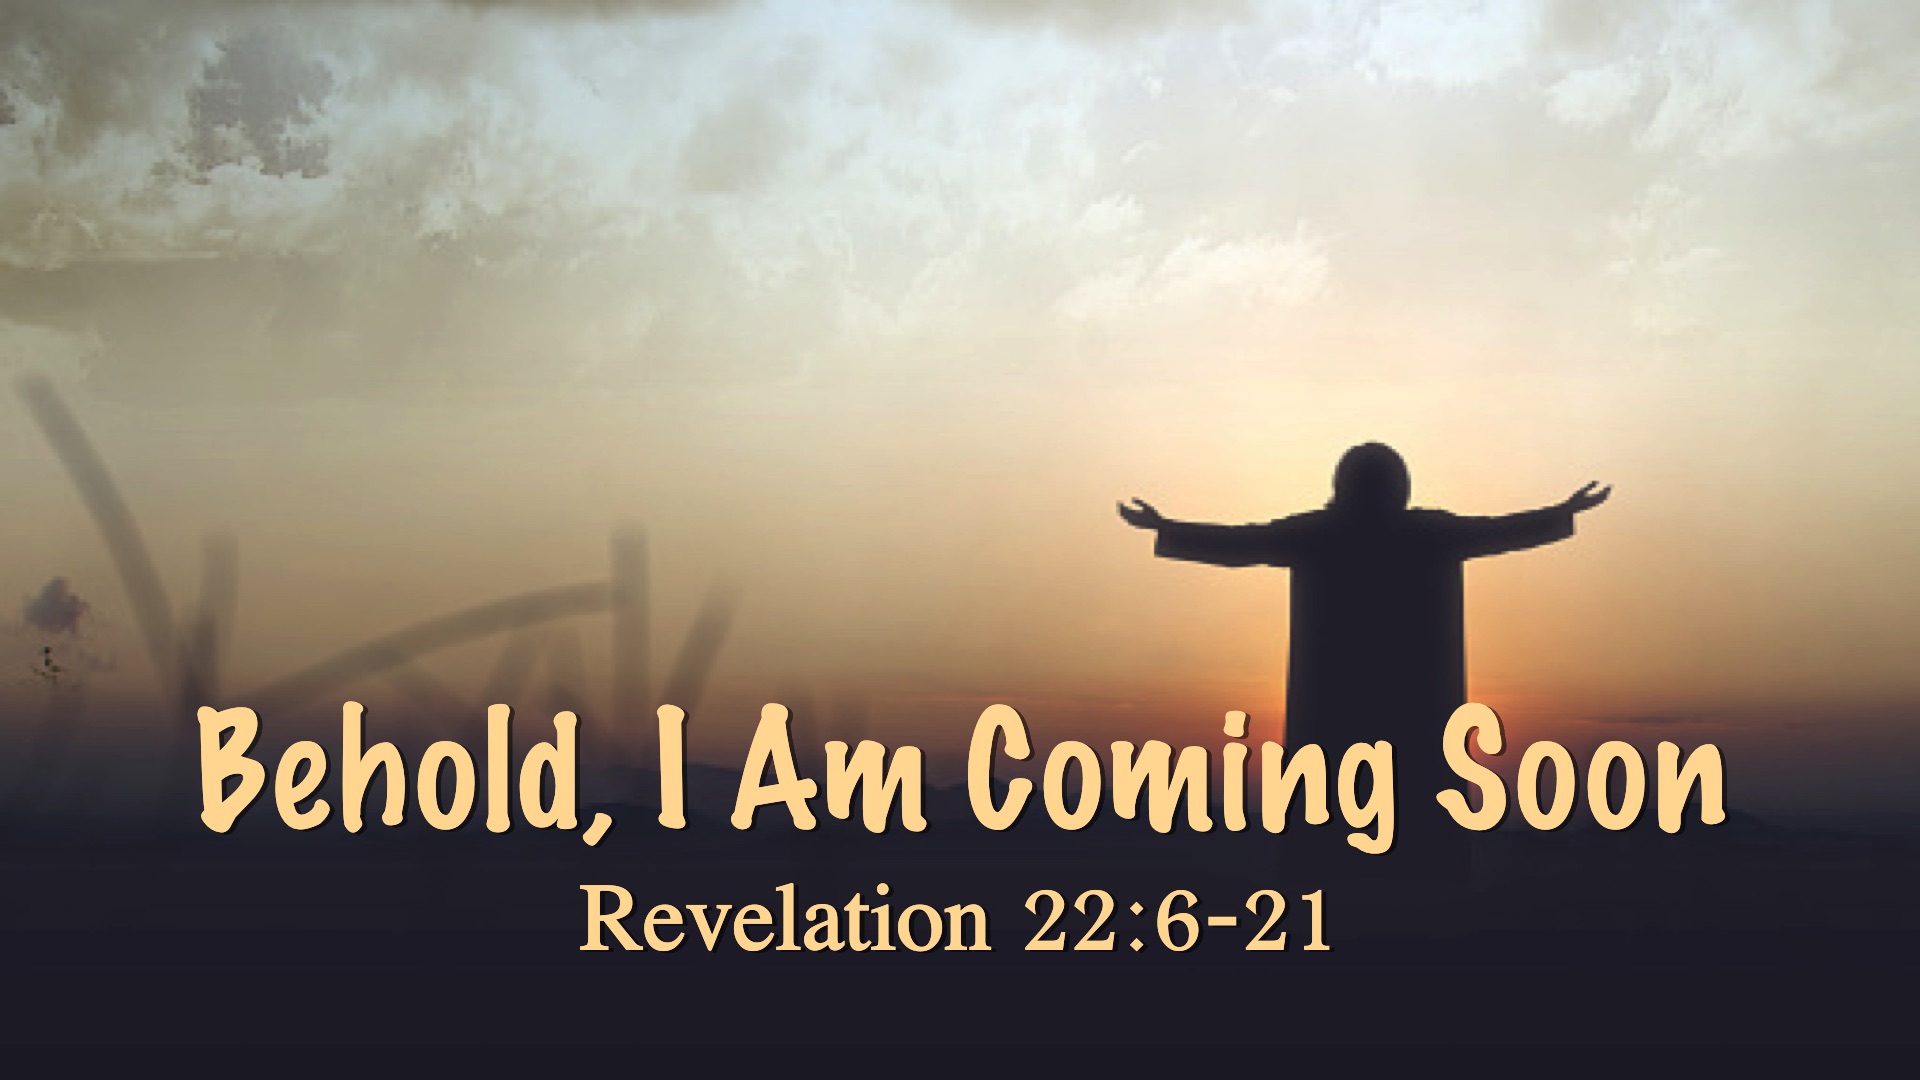 “The Book of Revelation: Behold, I Am Coming Soon”